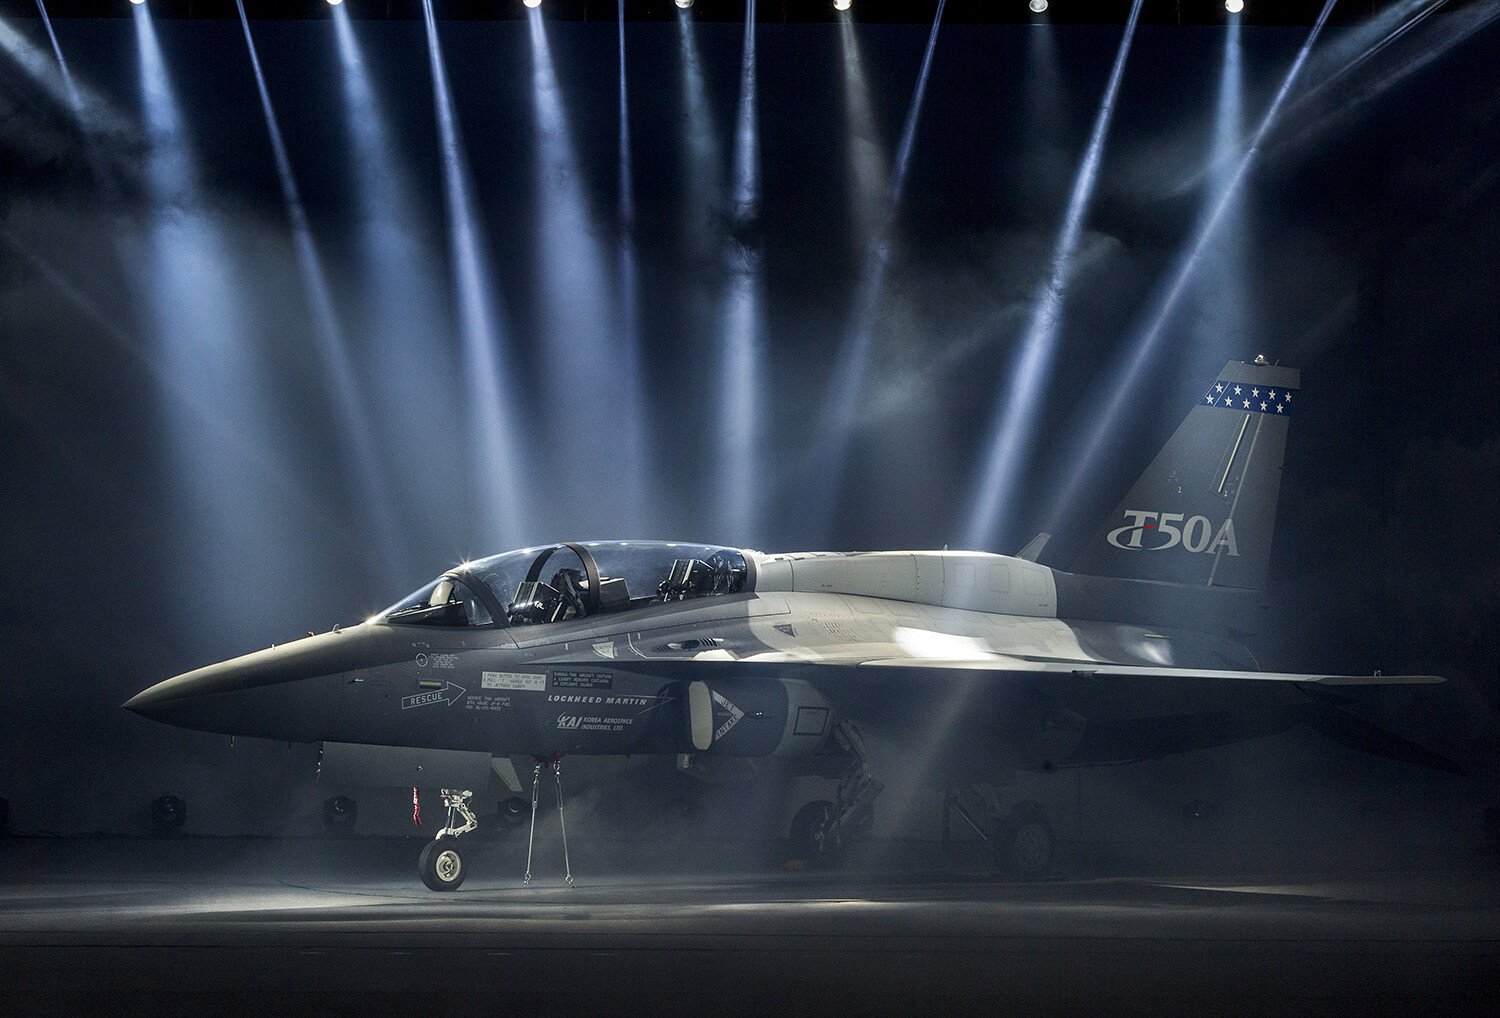 Lockheed Martin and KAI T-50A supersonic advanced jet trainers and light combat aircraft.